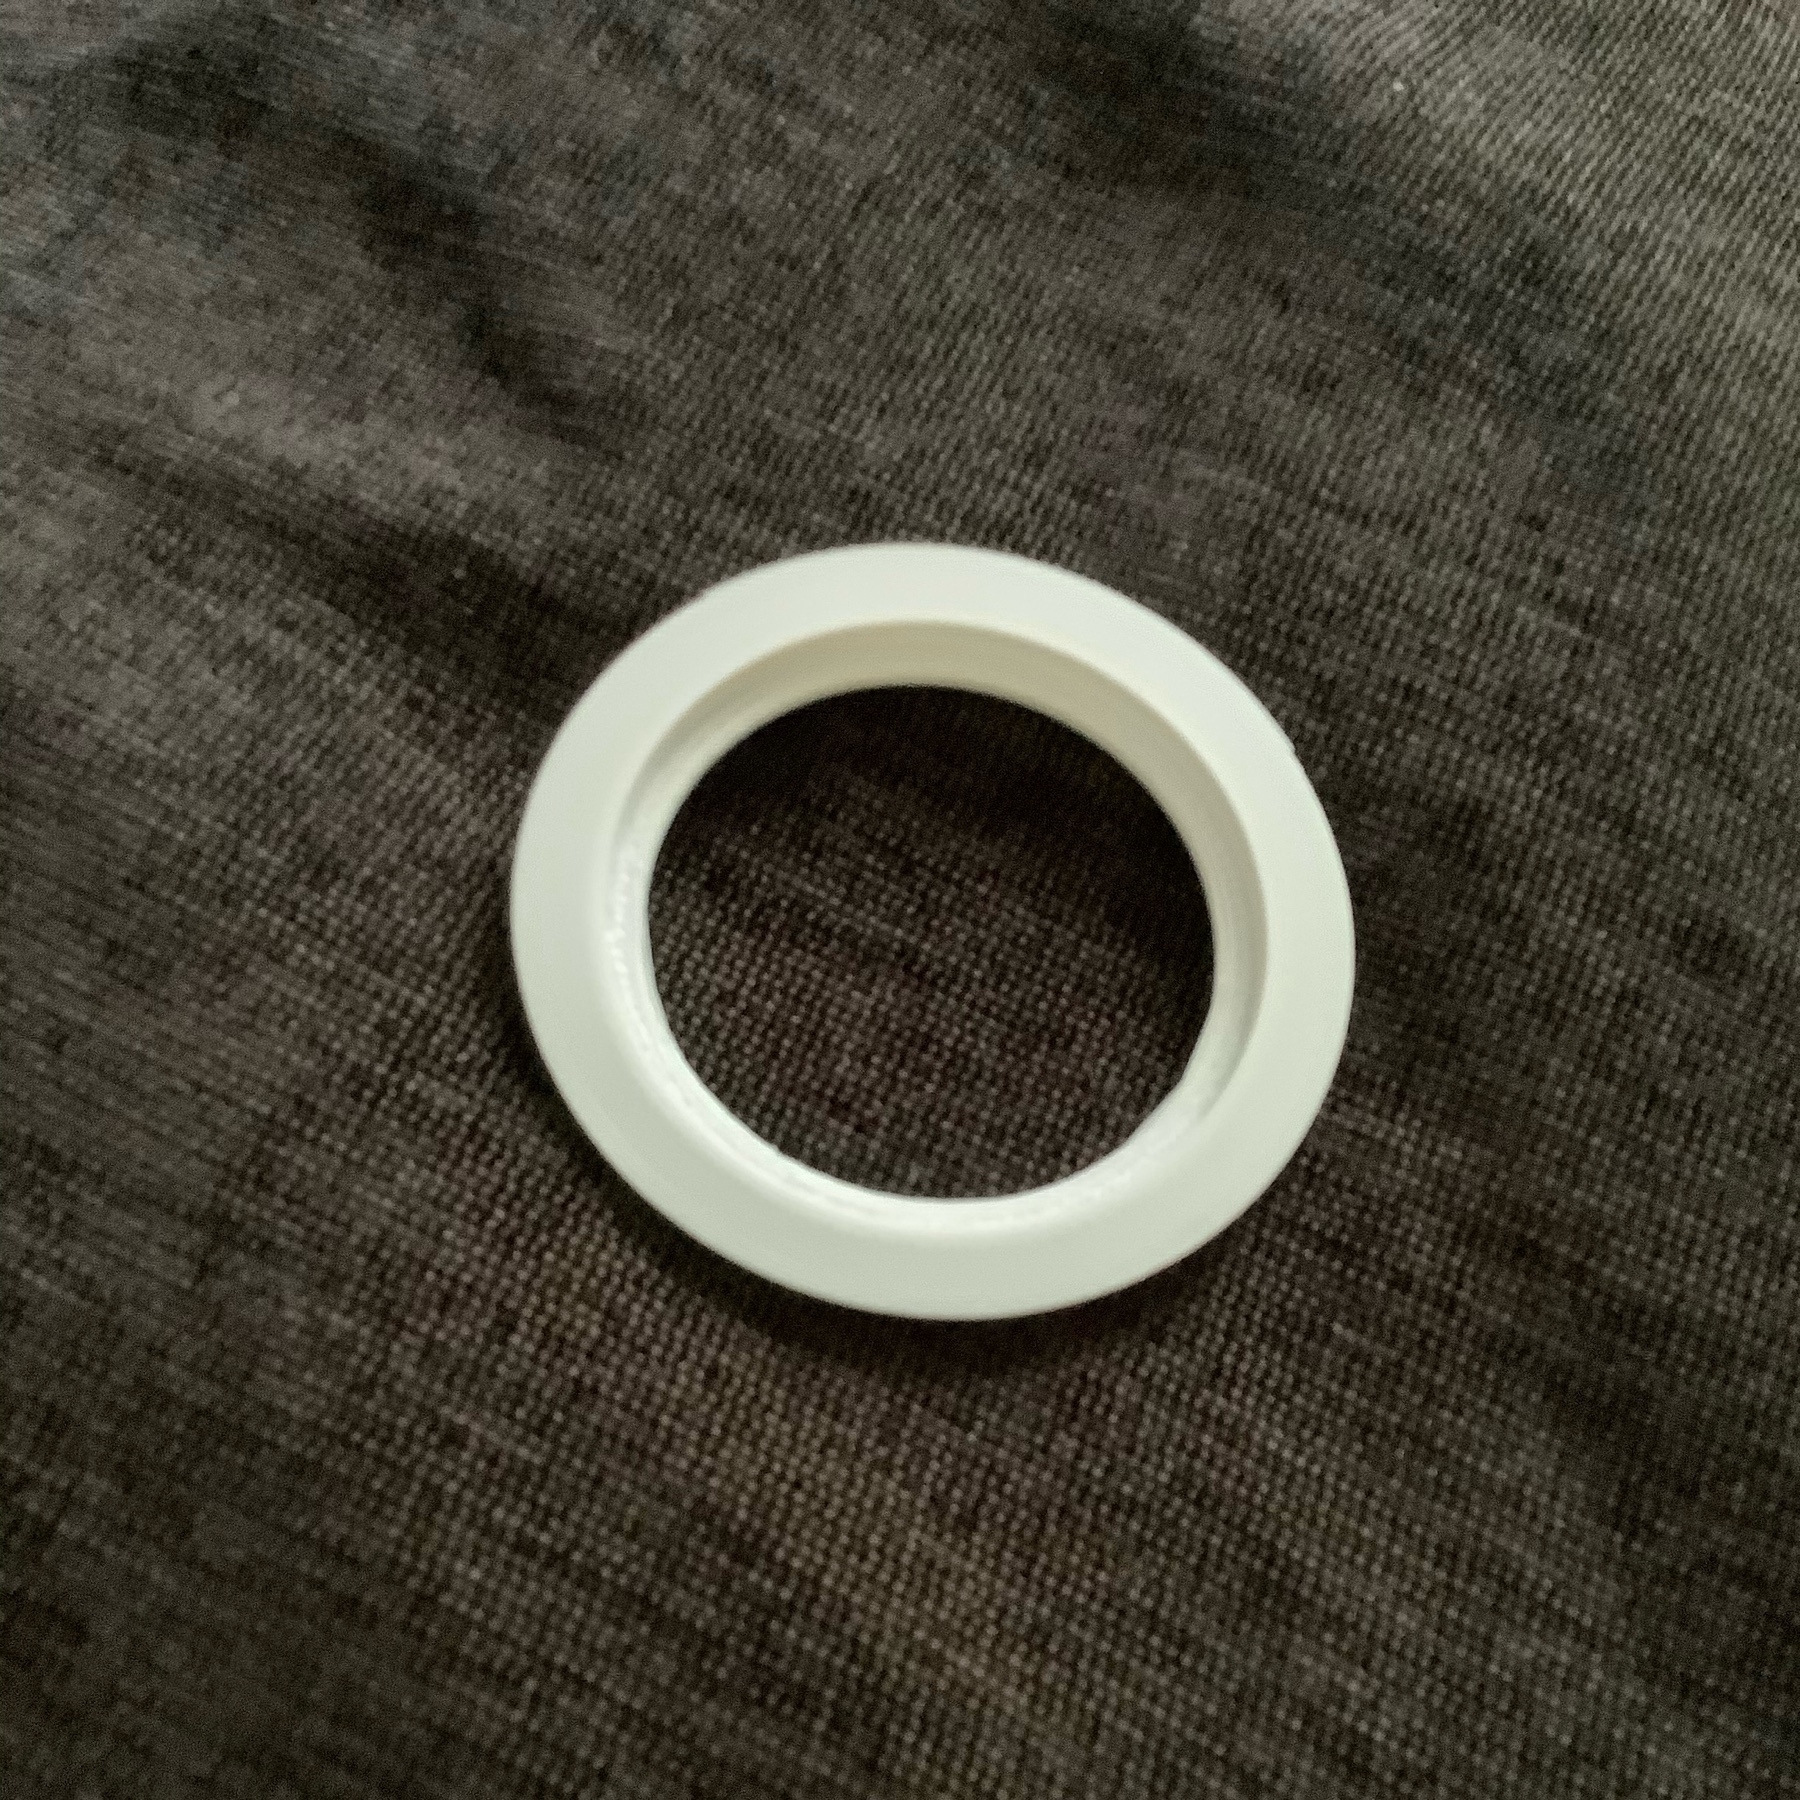 A white plastic ring with an outer lip on the top and an inner ring on the bottom.  